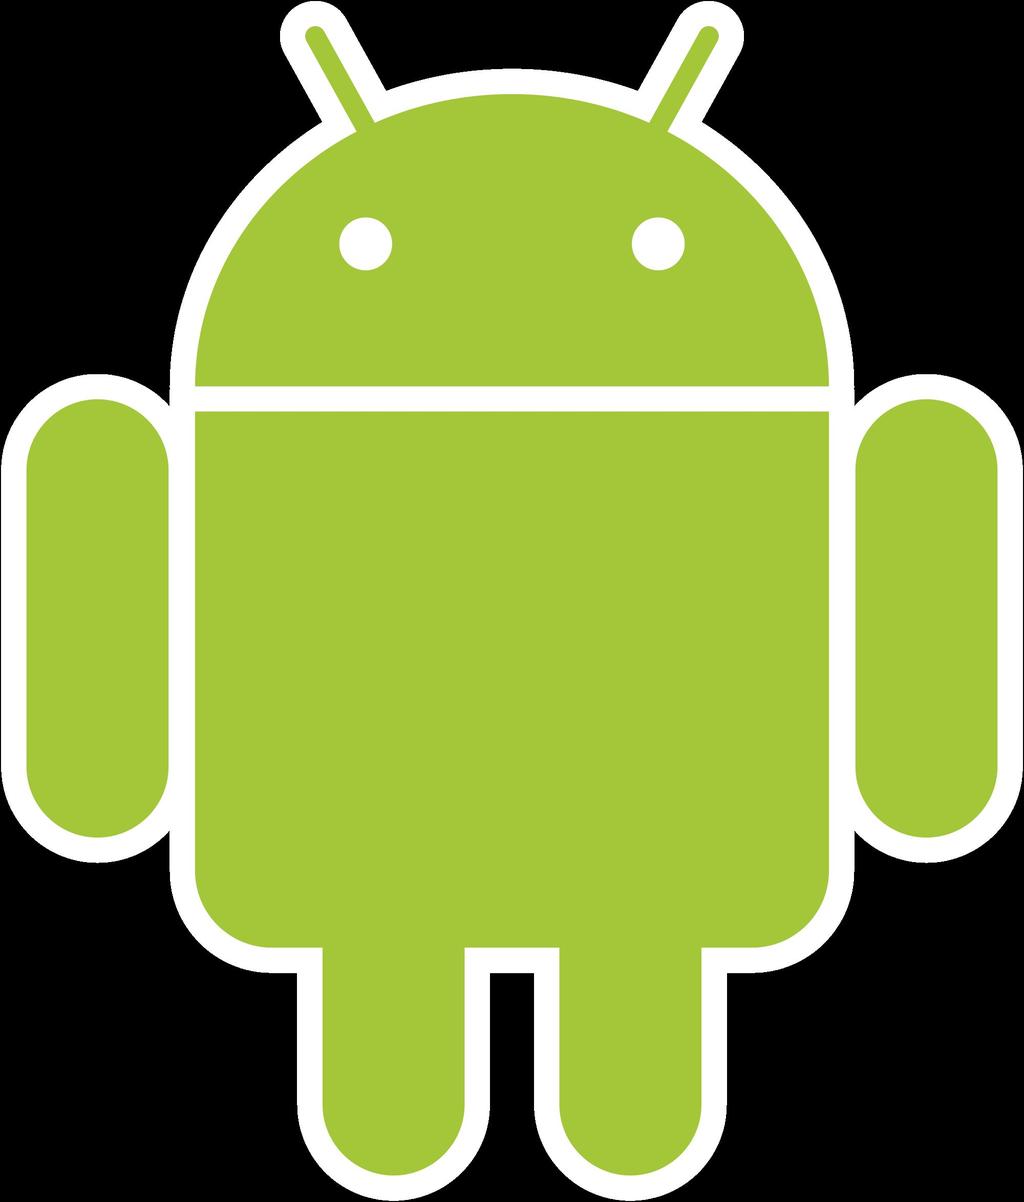 Software Why Android?